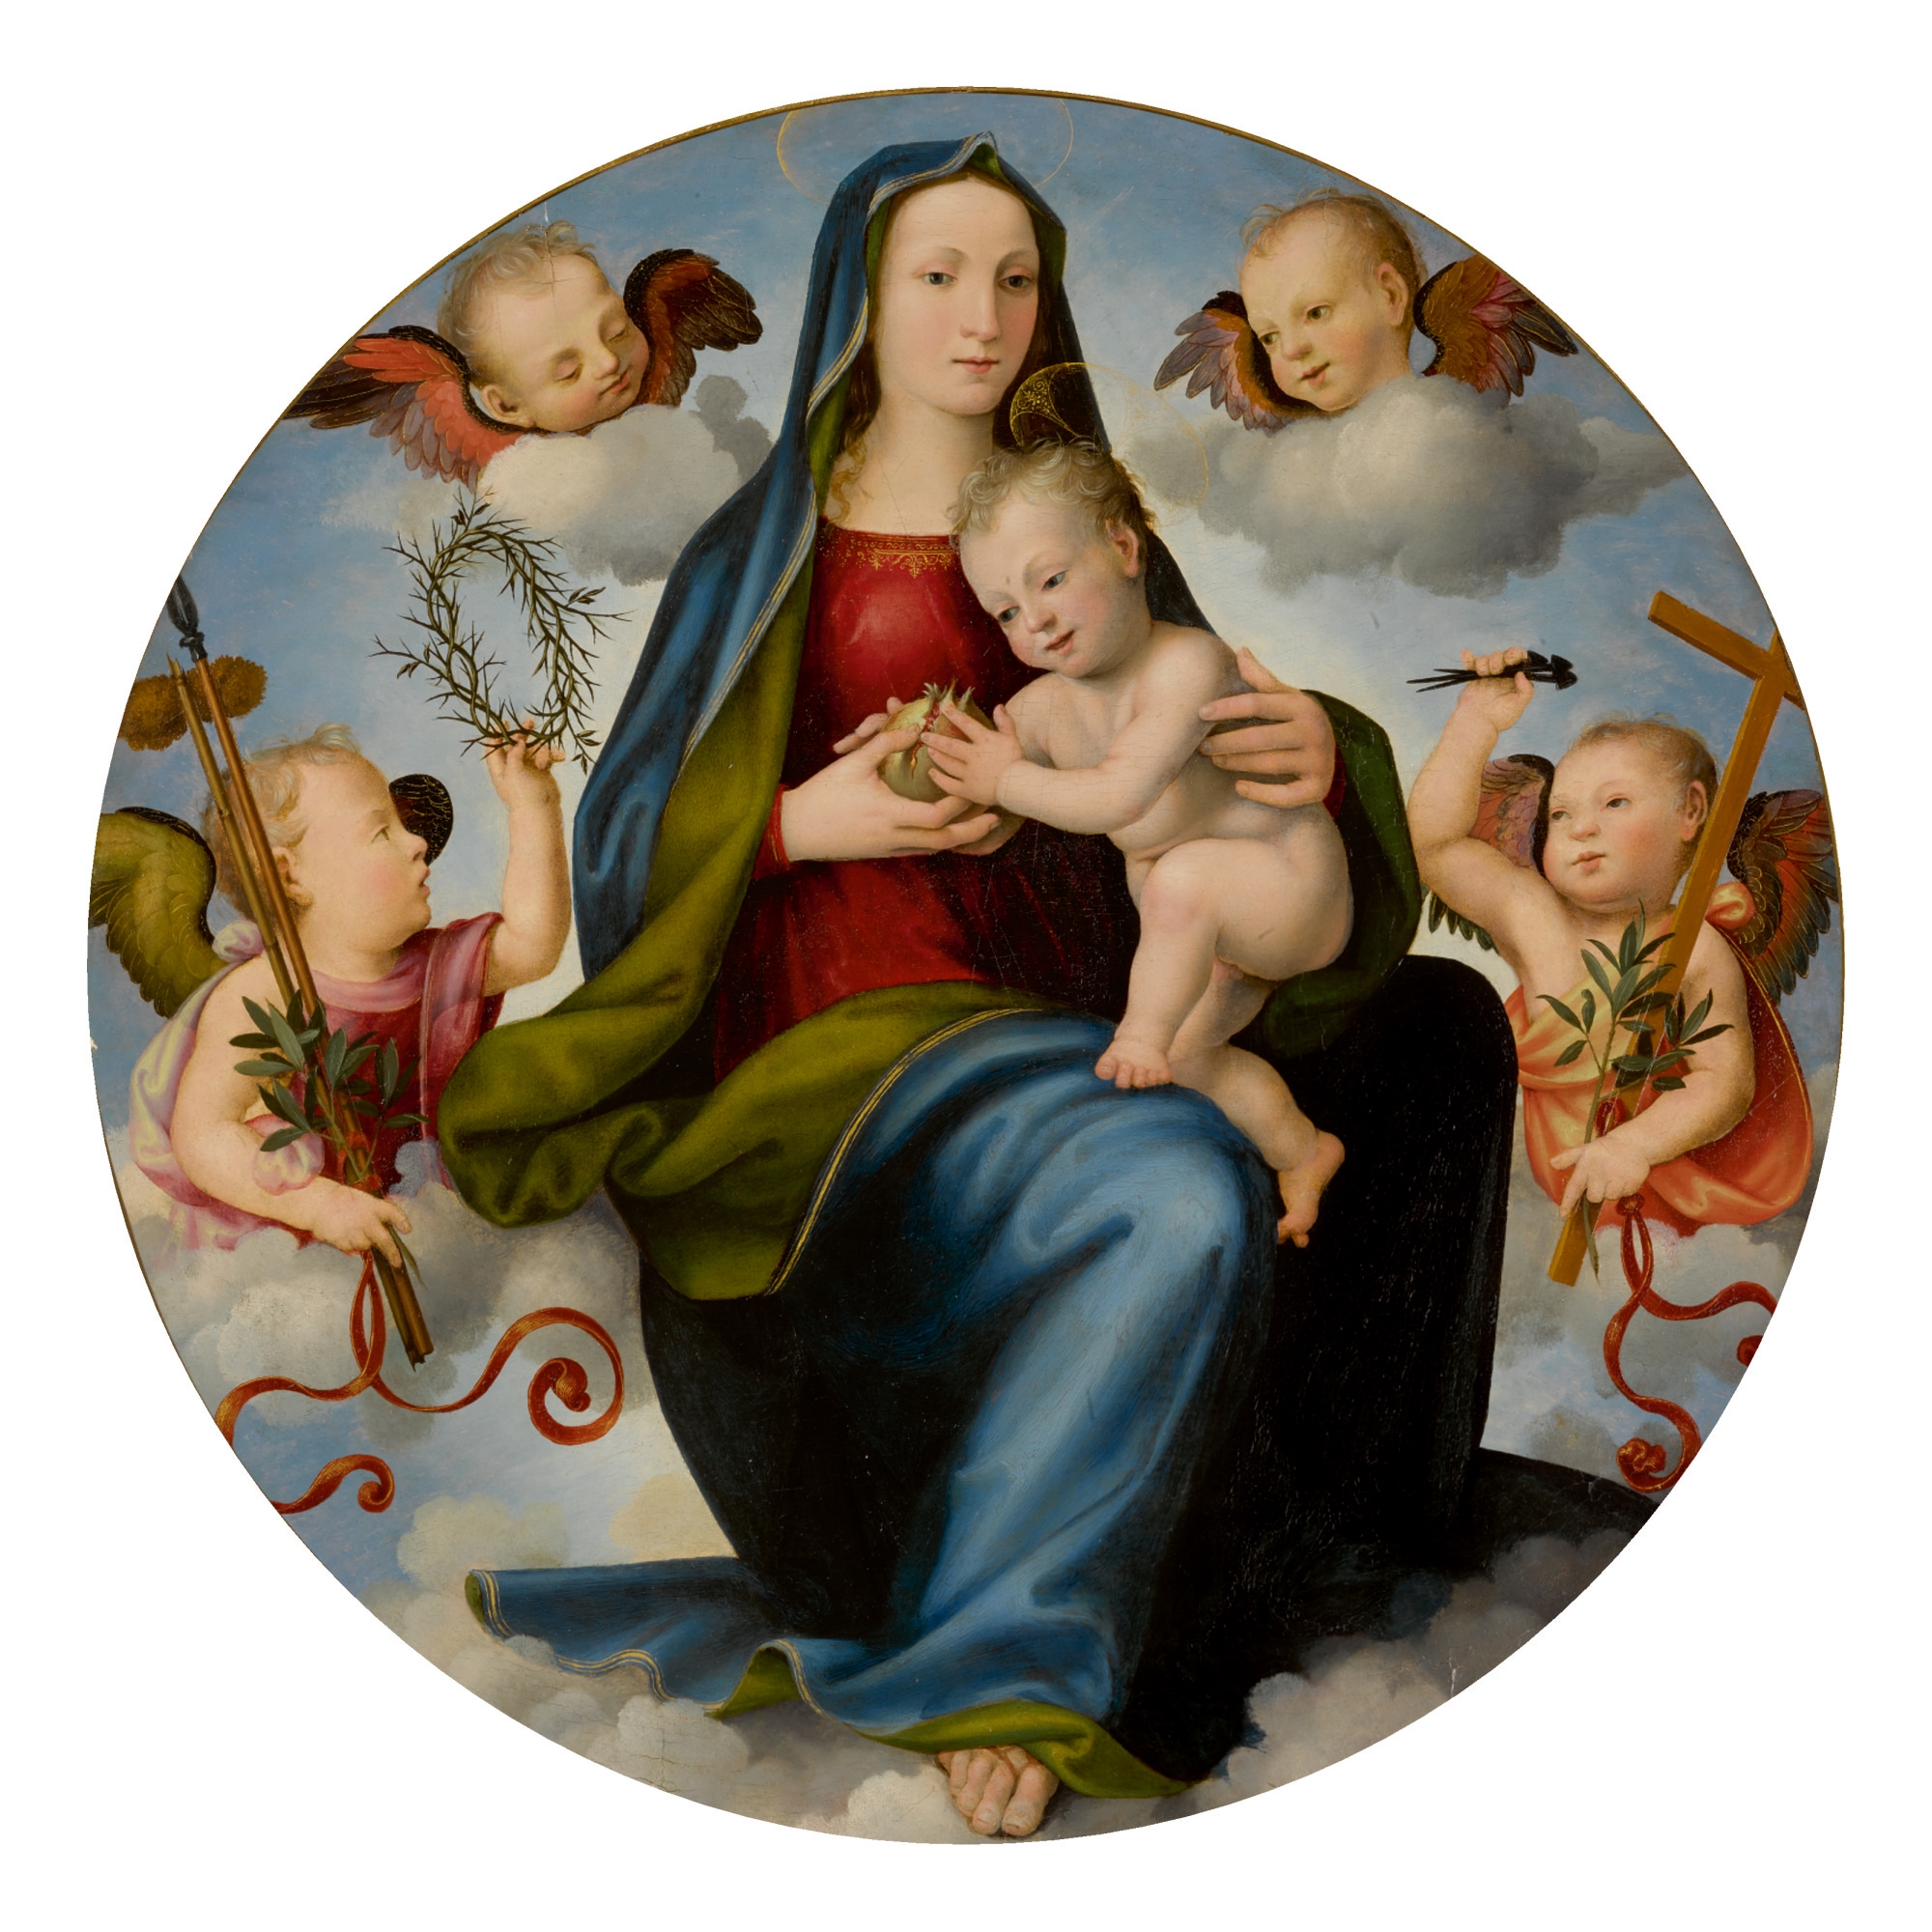 Madonna and Child Enthroned in the Clouds, Surrounded by Two Angels Holding Instruments of the Passion and Two Cherubim by Mariotto Albertinelli